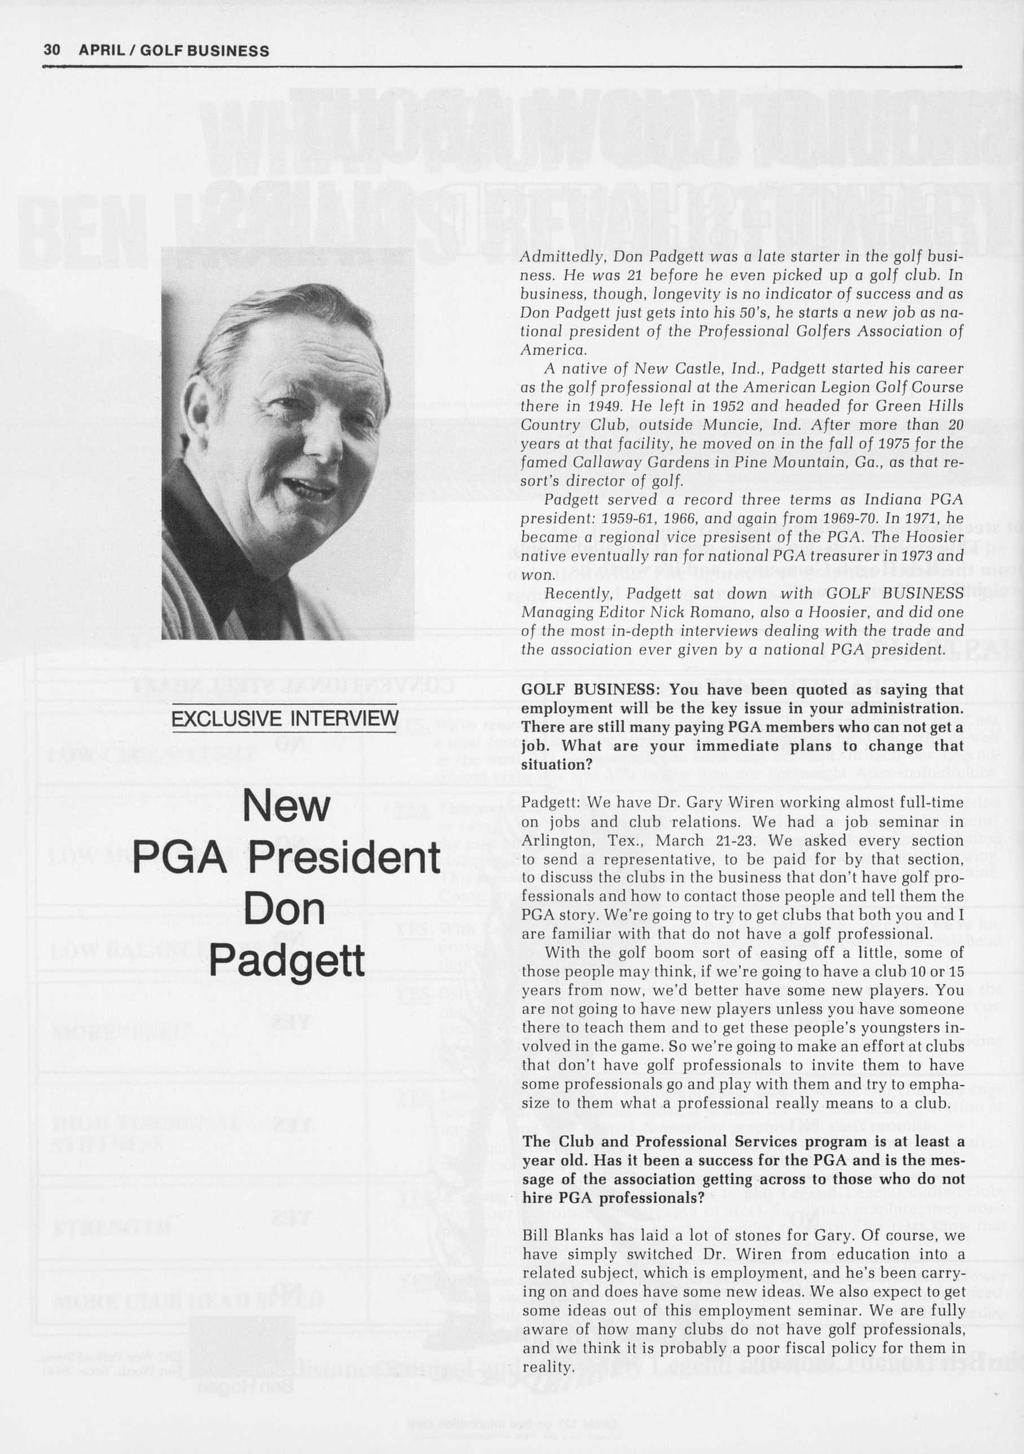 Admittedly, Don Padgett was a late starter in the golf business. He was 21 before he even picked up a golf club.